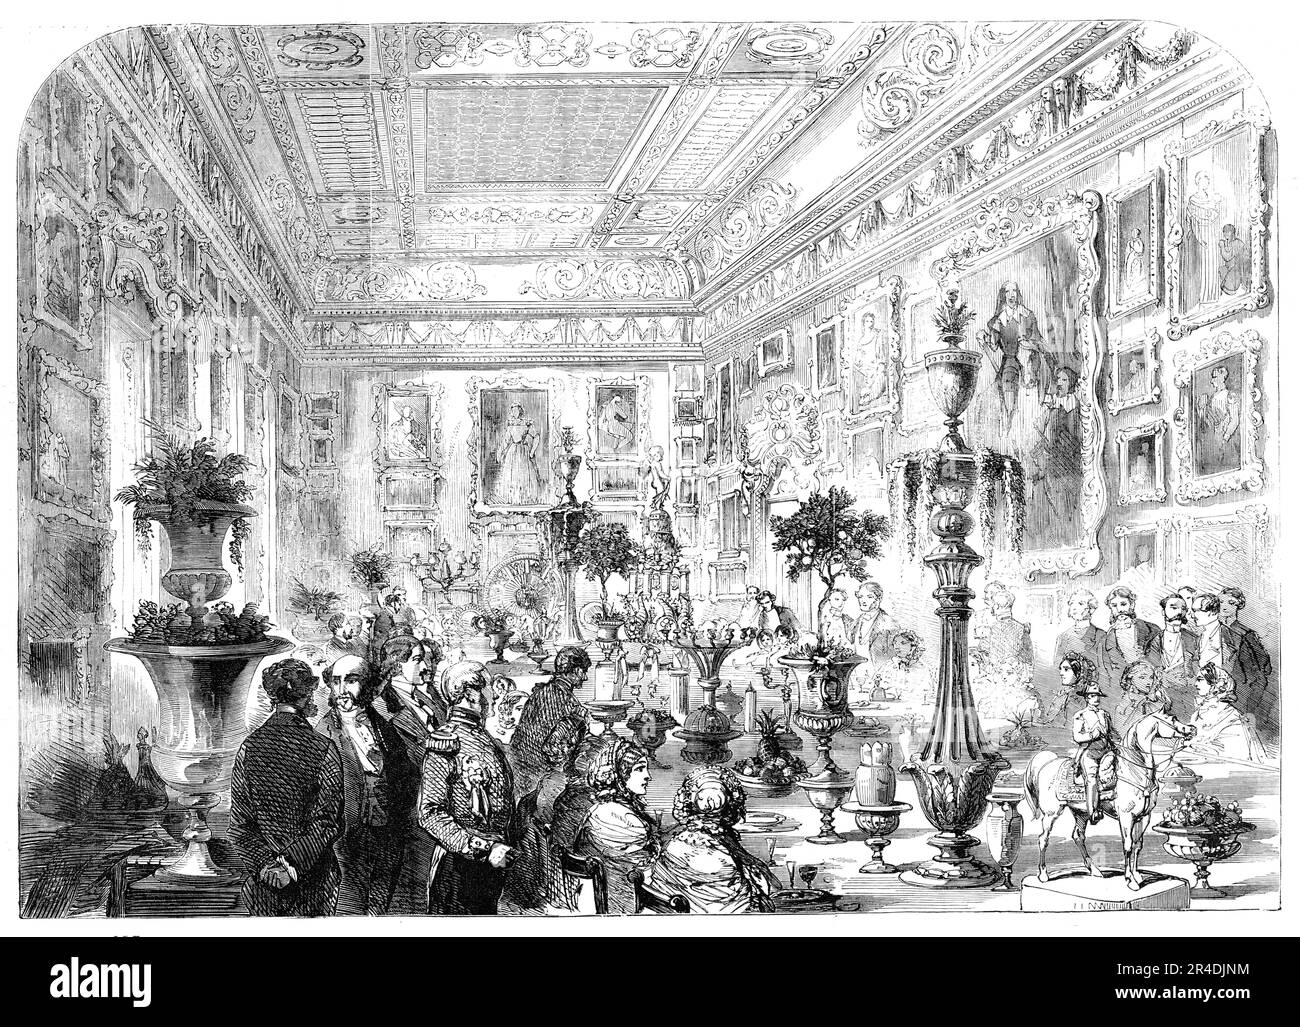 Marriage of Sir Robert Peel and Lady Emily Hay - The Dejeuner in the Waterloo Gallery at Apsley House, [London], 1856. 'The table, which was a miracle of ornamental decoration, extended from end to end of the gallery; and at each extremity rose...ornamented with garlands of flowers, the two gigantic candelabra of Russian porphyry...In the middle of the table was the celebrated Portuguese plateau, extending, in solid silver, five-and-twenty feet. From the centre...rose the elegant Wedding Cake...Orange-trees, bearing ripe fruit and blossoms, shed their odours upon the table...The famous Dresden Stock Photo